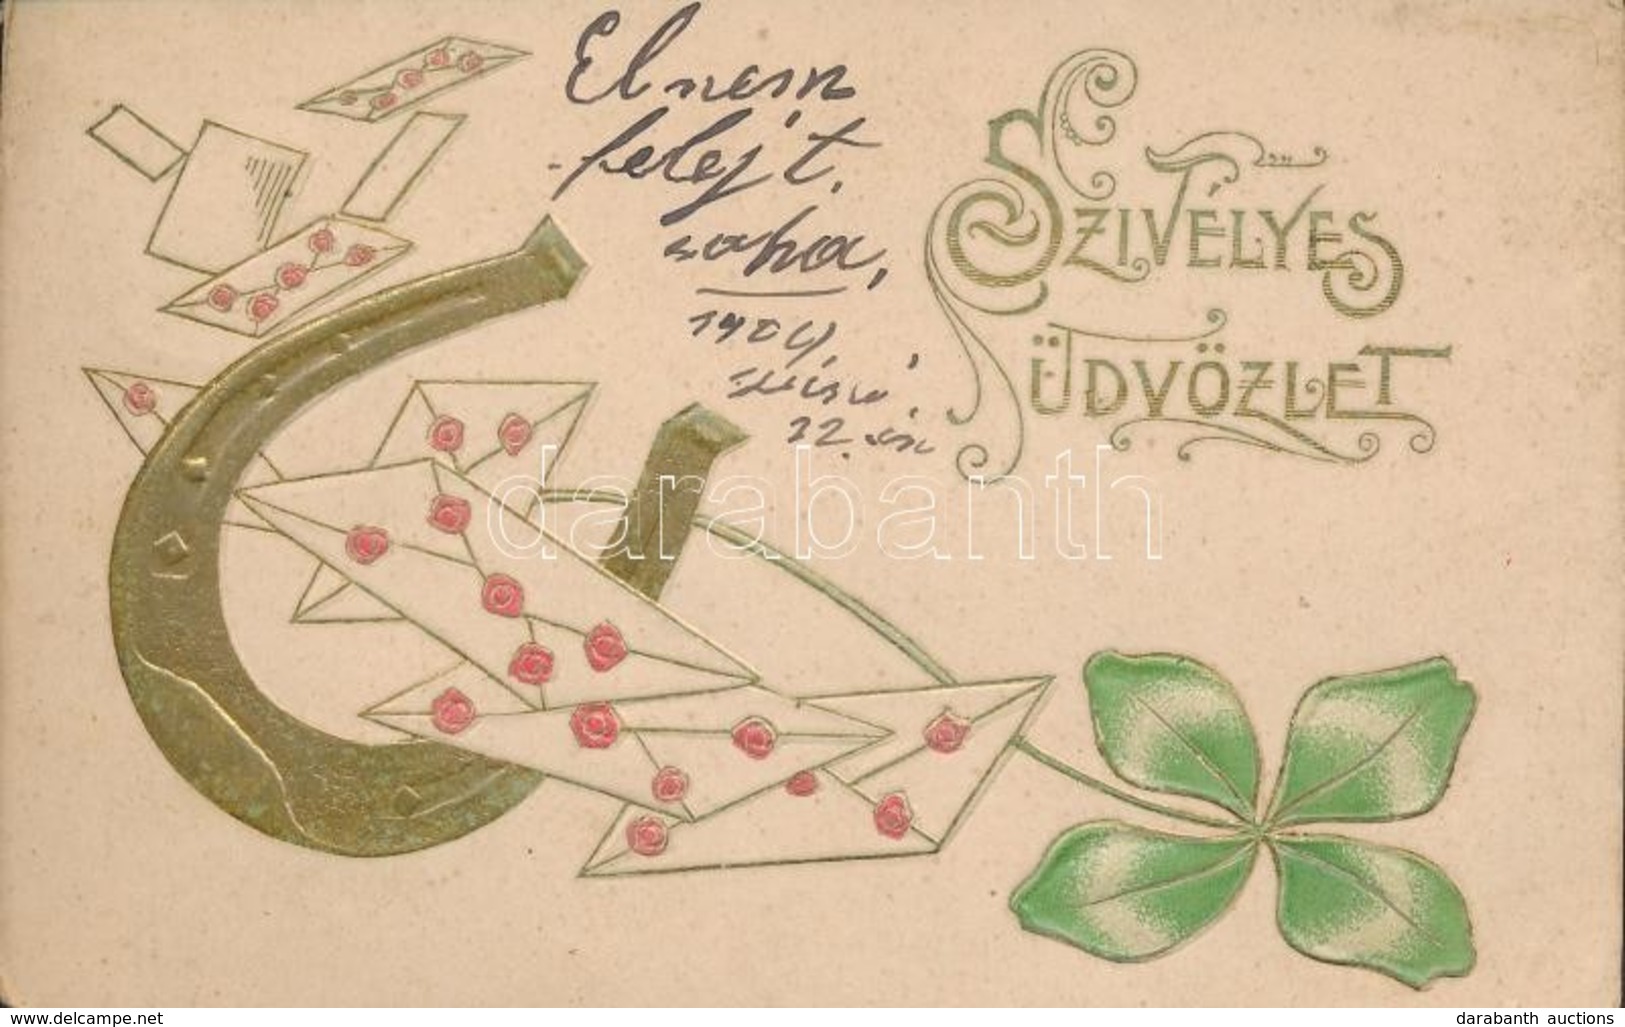 T2/T3 Greeting Card, Horse Shoe, Clover, Golden Emb. Litho (Rb) - Ohne Zuordnung